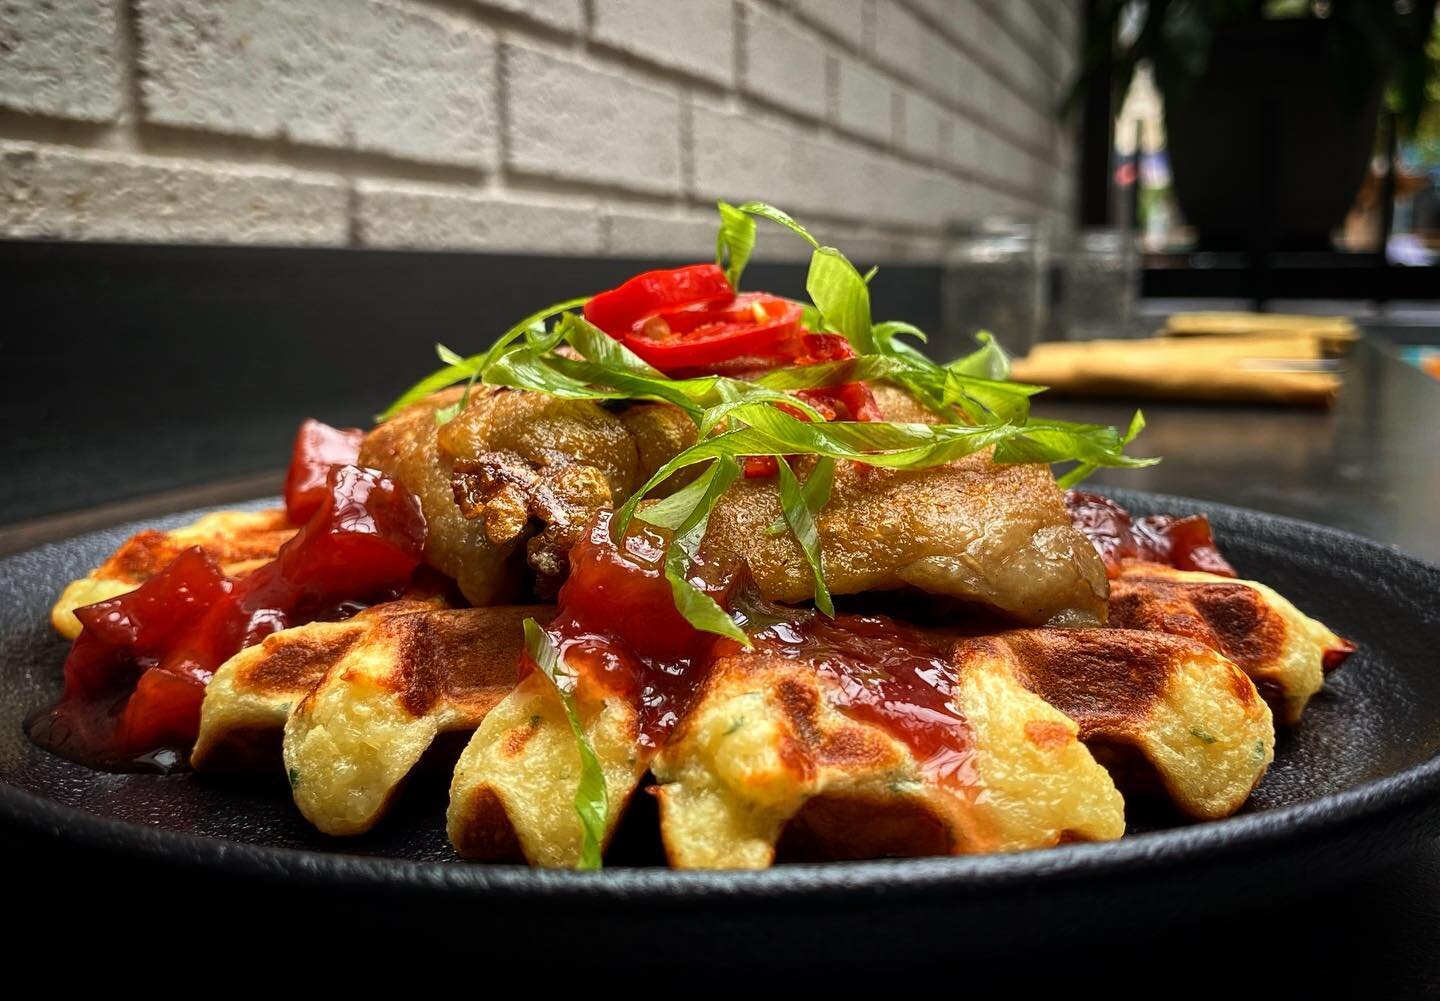 🧇JALAPE&Ntilde;O WAFFLE🧇
.
Crispy duck, plum jam &amp; fresno chili
.
#brunch #special #saturday #saturdayvibes #delicious #deliciousfood #blogger #foodie #foodporn